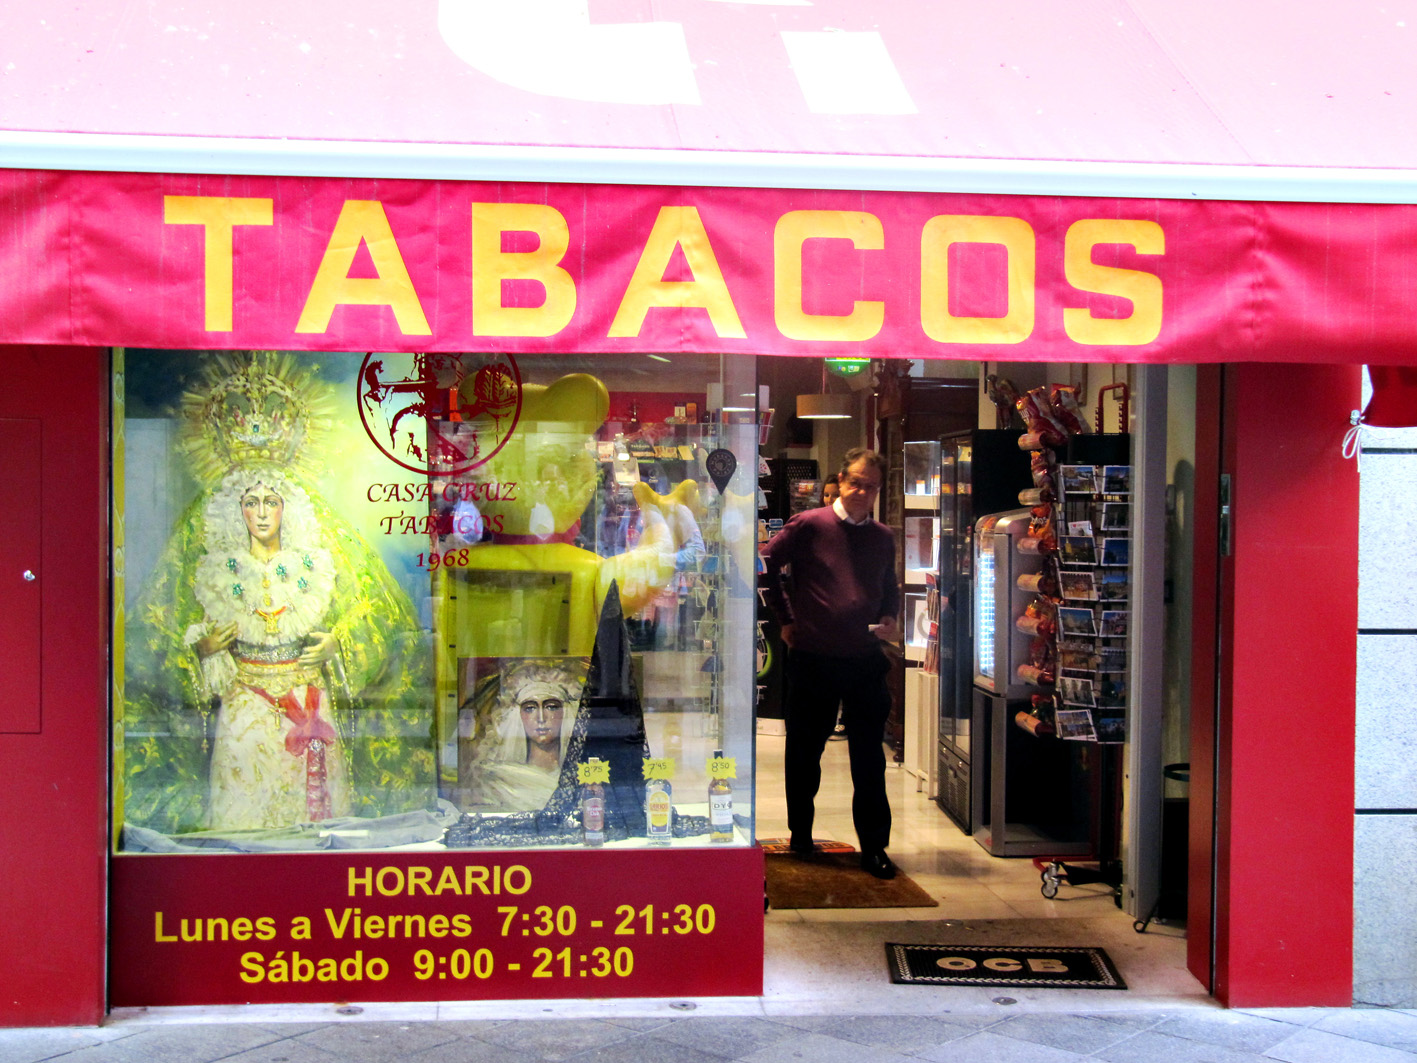 Tabacos at the Calle O'Donnell